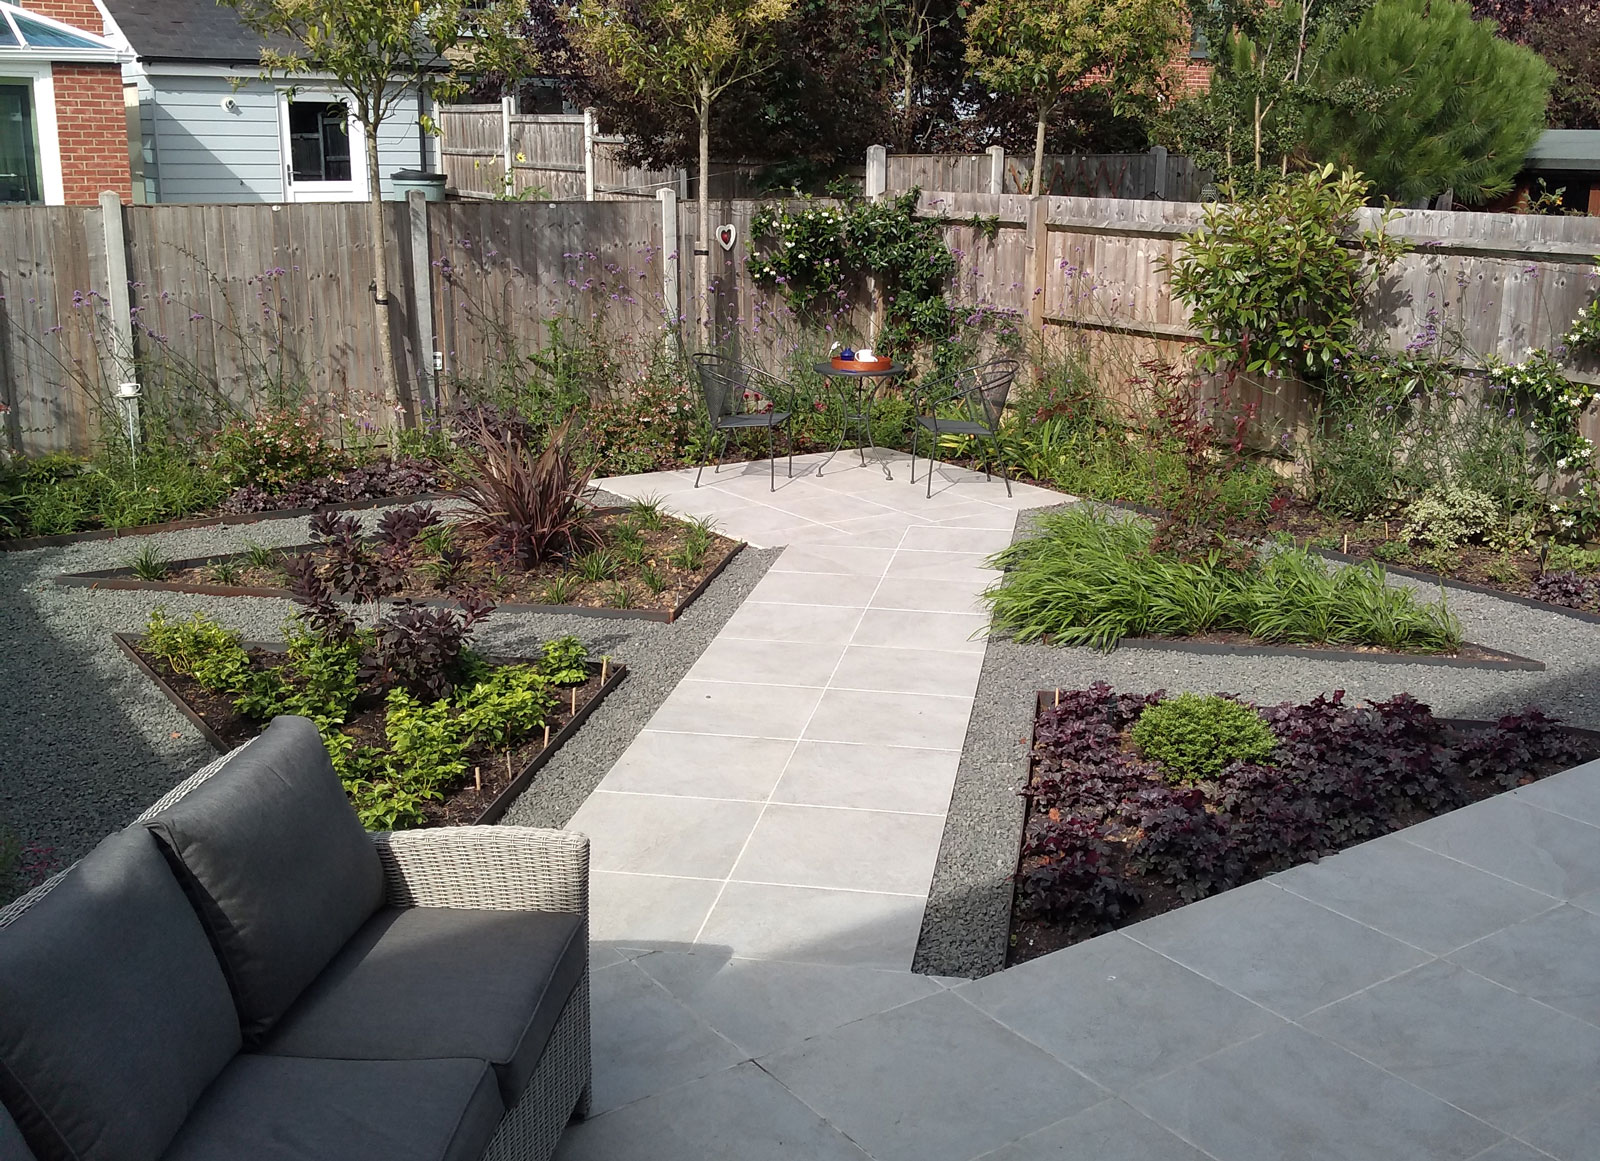 newly landscaped garden with a mix of porcelain paving and gravel paths forming a criss cross pattern with planting in between